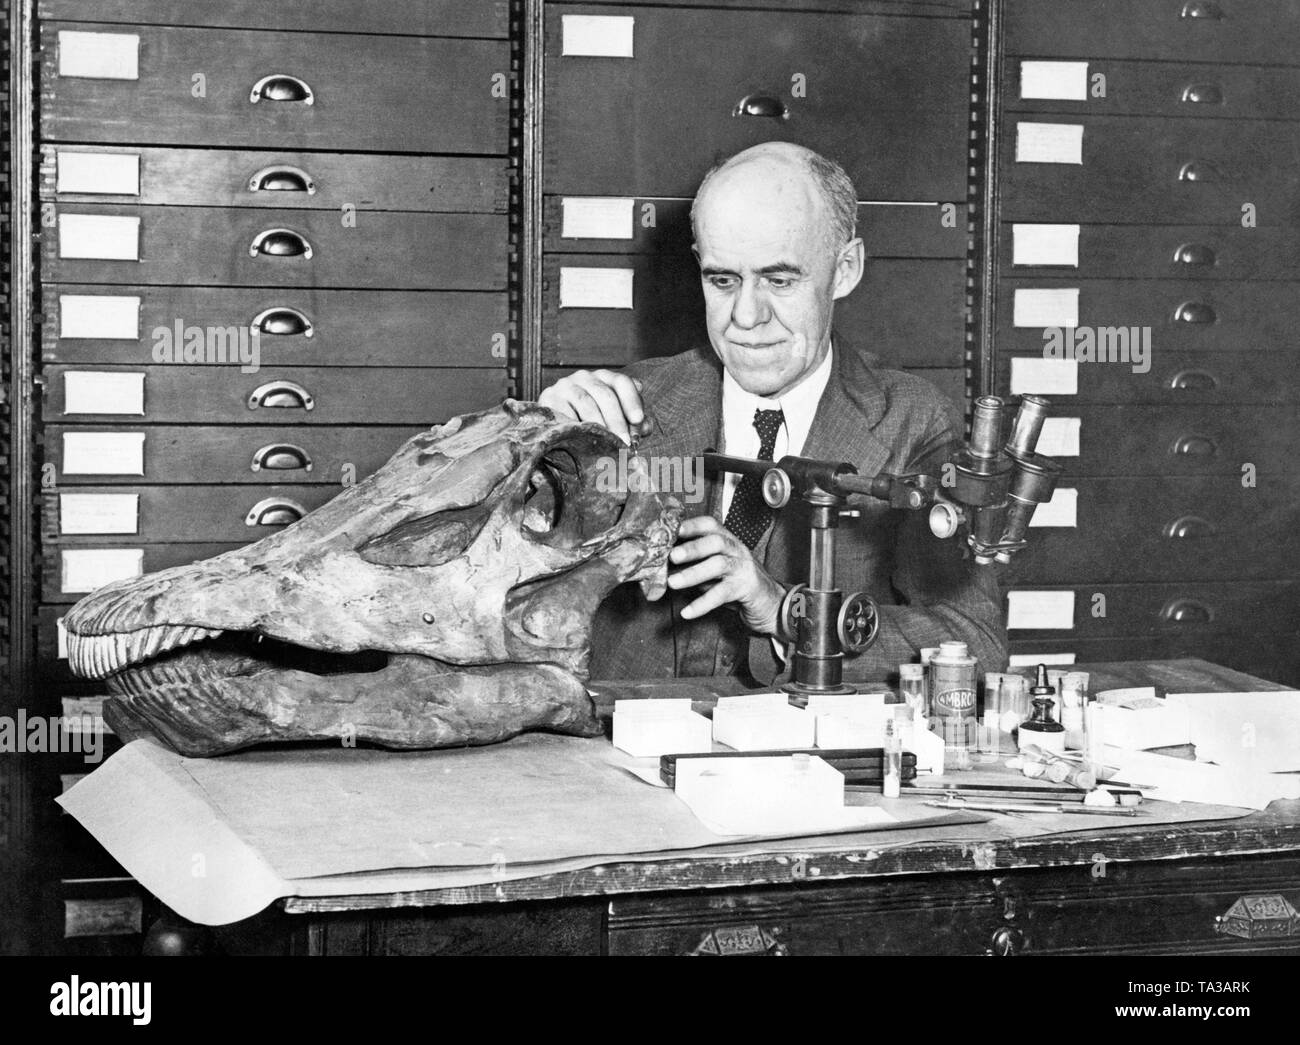 Dr. Charles Gilmore, curator of the Department of Vertebrate Paleontology of the National Museum, prepares the head of a dinosaur. The bones of the dinosaurs were found in Utah in 1923. At this time, this skeletal find was unique, as it was the skeleton of one of the largest species of dinosaurs. Stock Photo